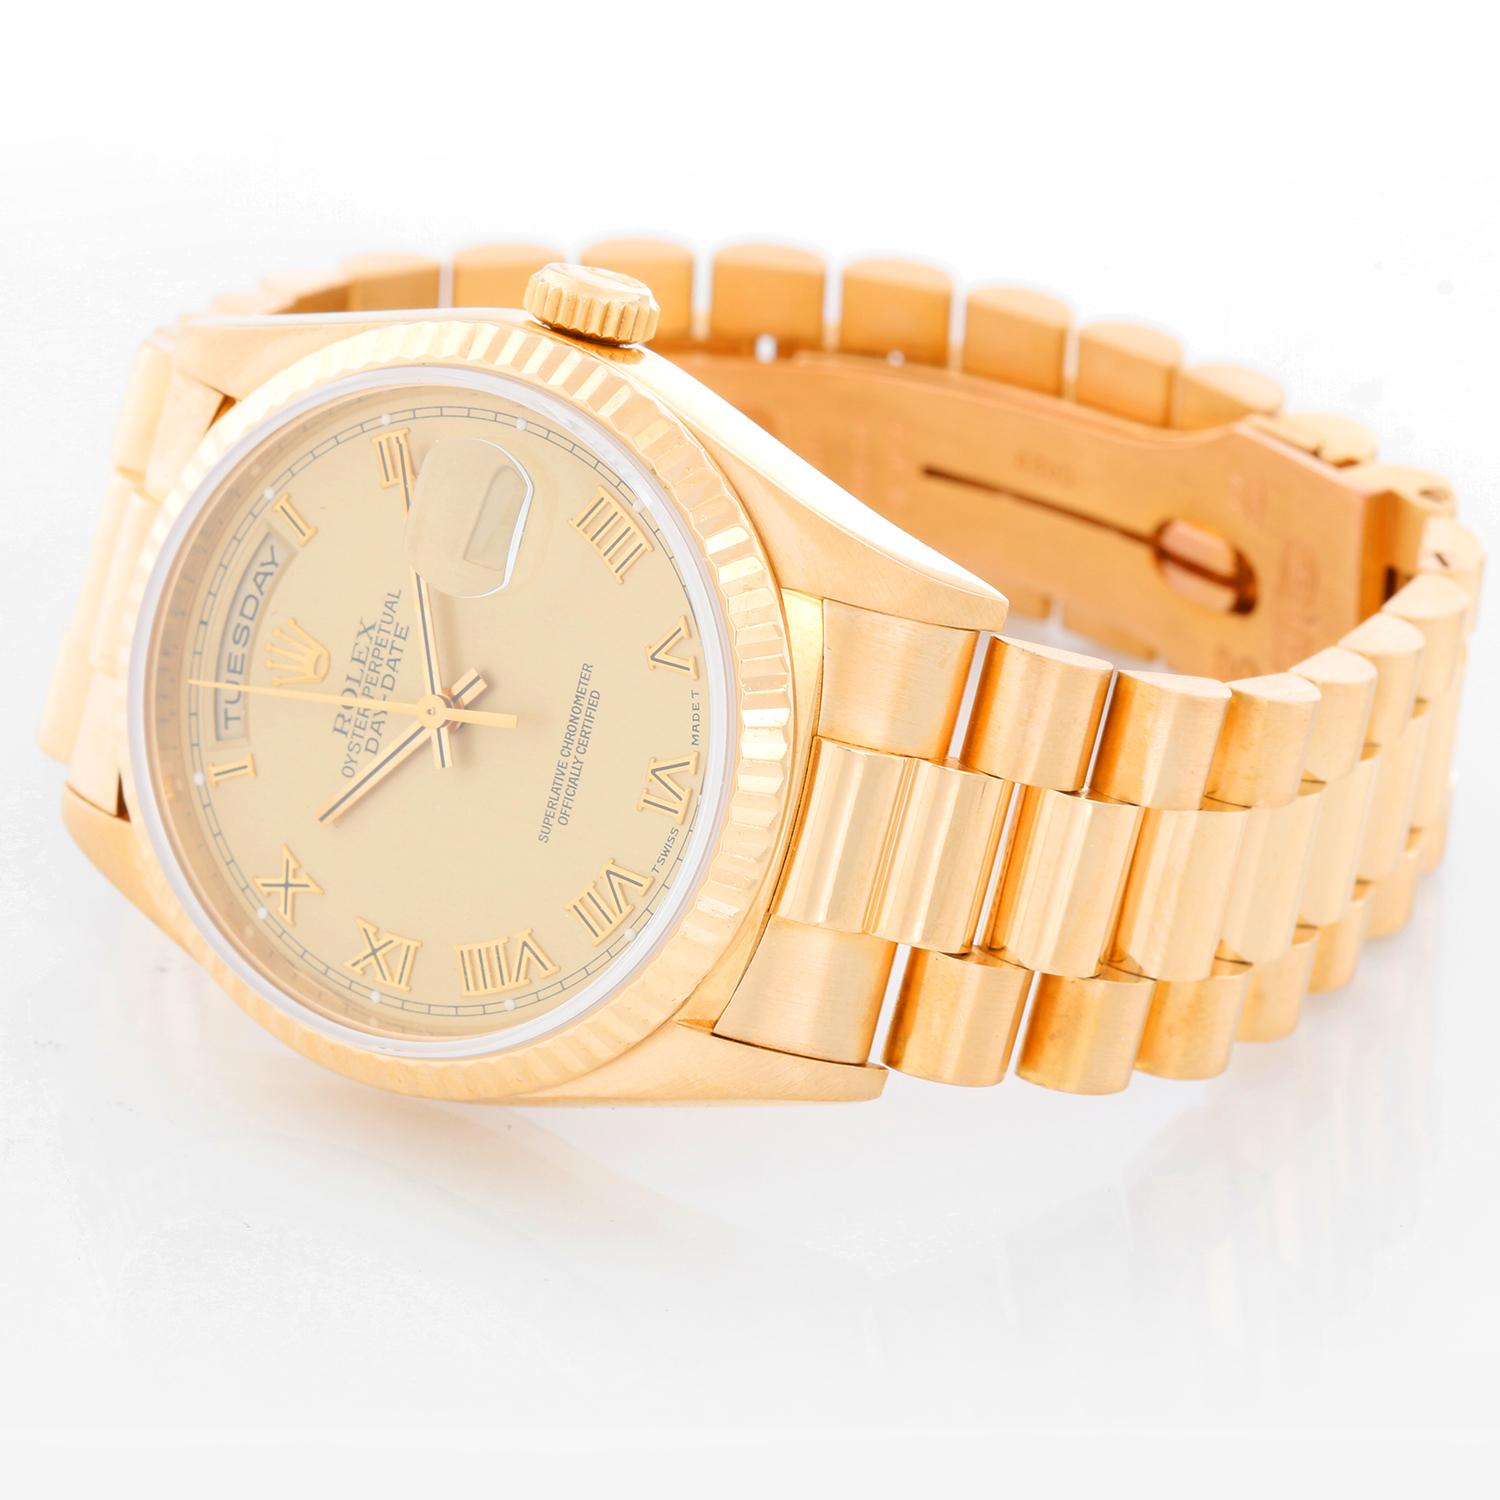 Men's Gold Rolex President Day-Date Watch 18238 - Automatic winding, 31 jewels, double Quickset, sapphire crystal. 18k yellow gold case and fluted bezel (36mm diameter). Champagne dial with Roman numerals. 18k yellow gold President bracelet.